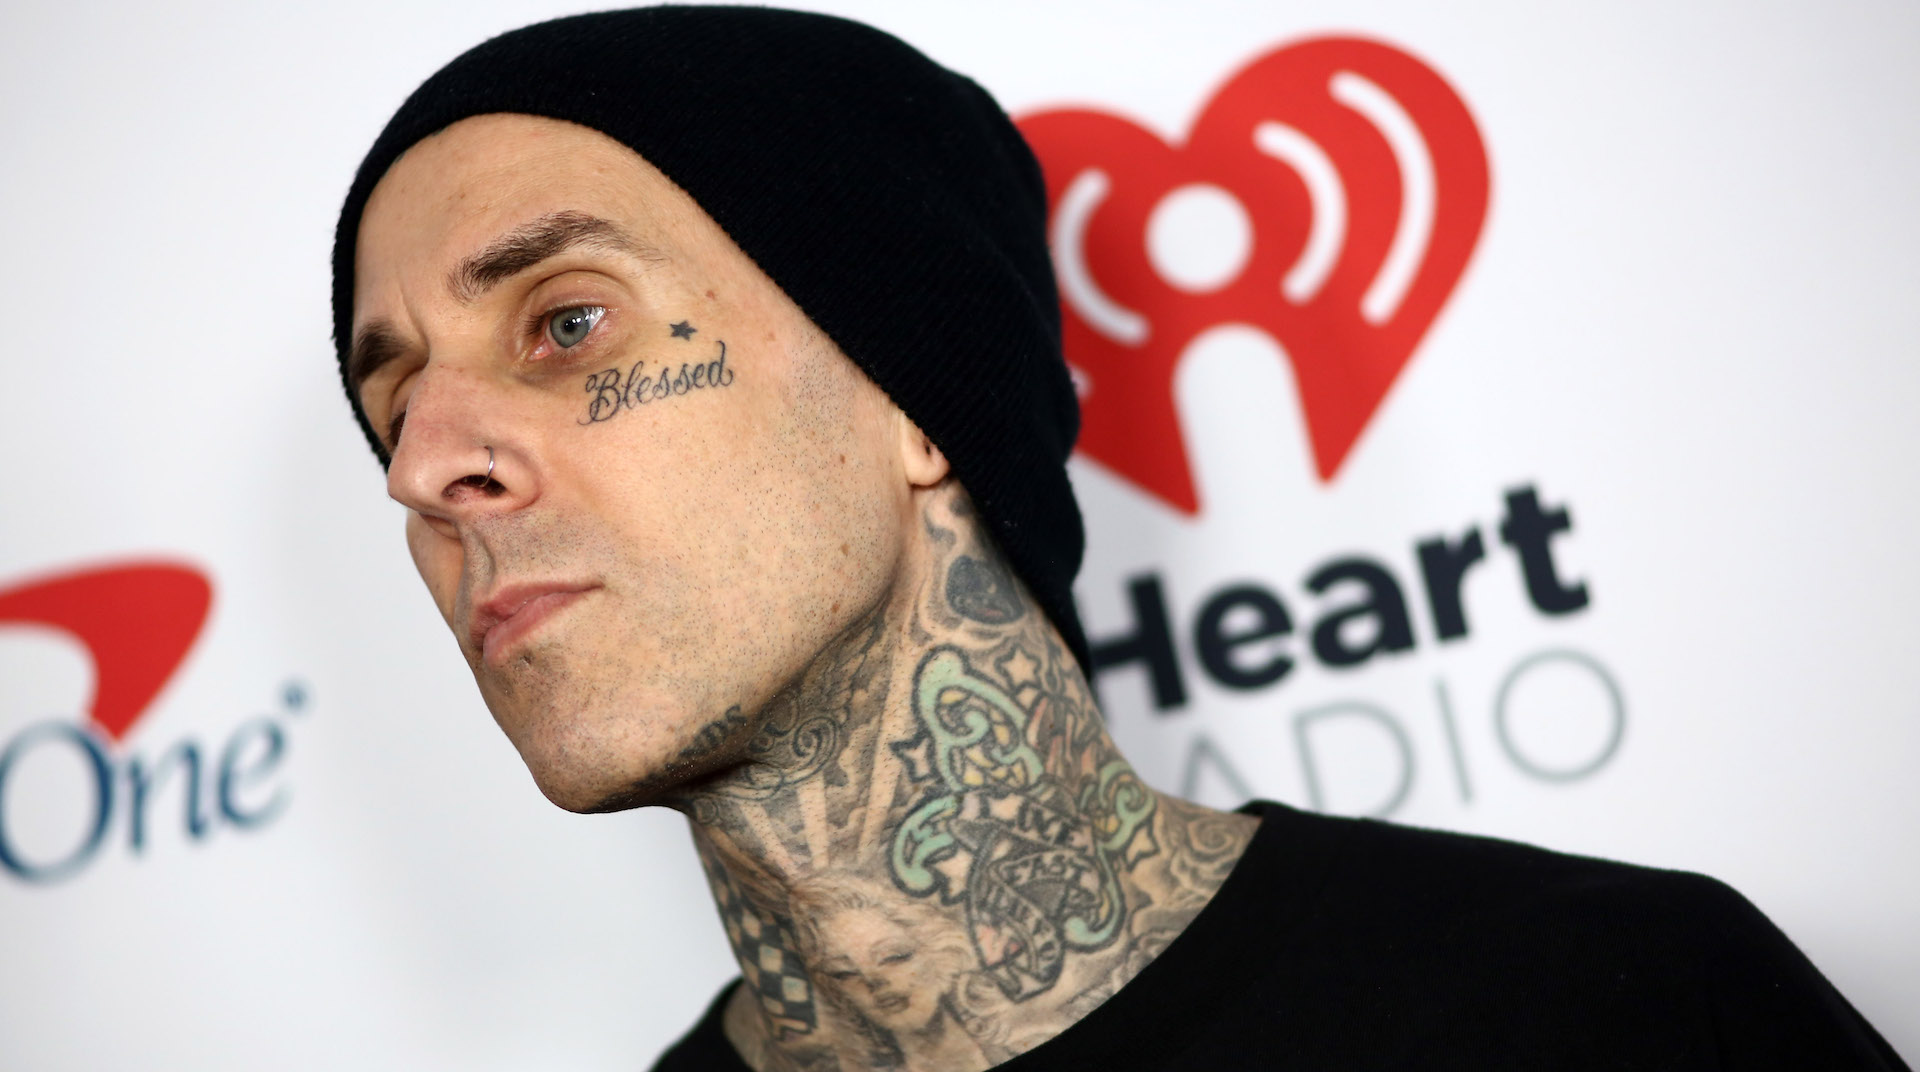 Travis Barker Tattoos - Every Travis Barker Tattoo Meaning Explained